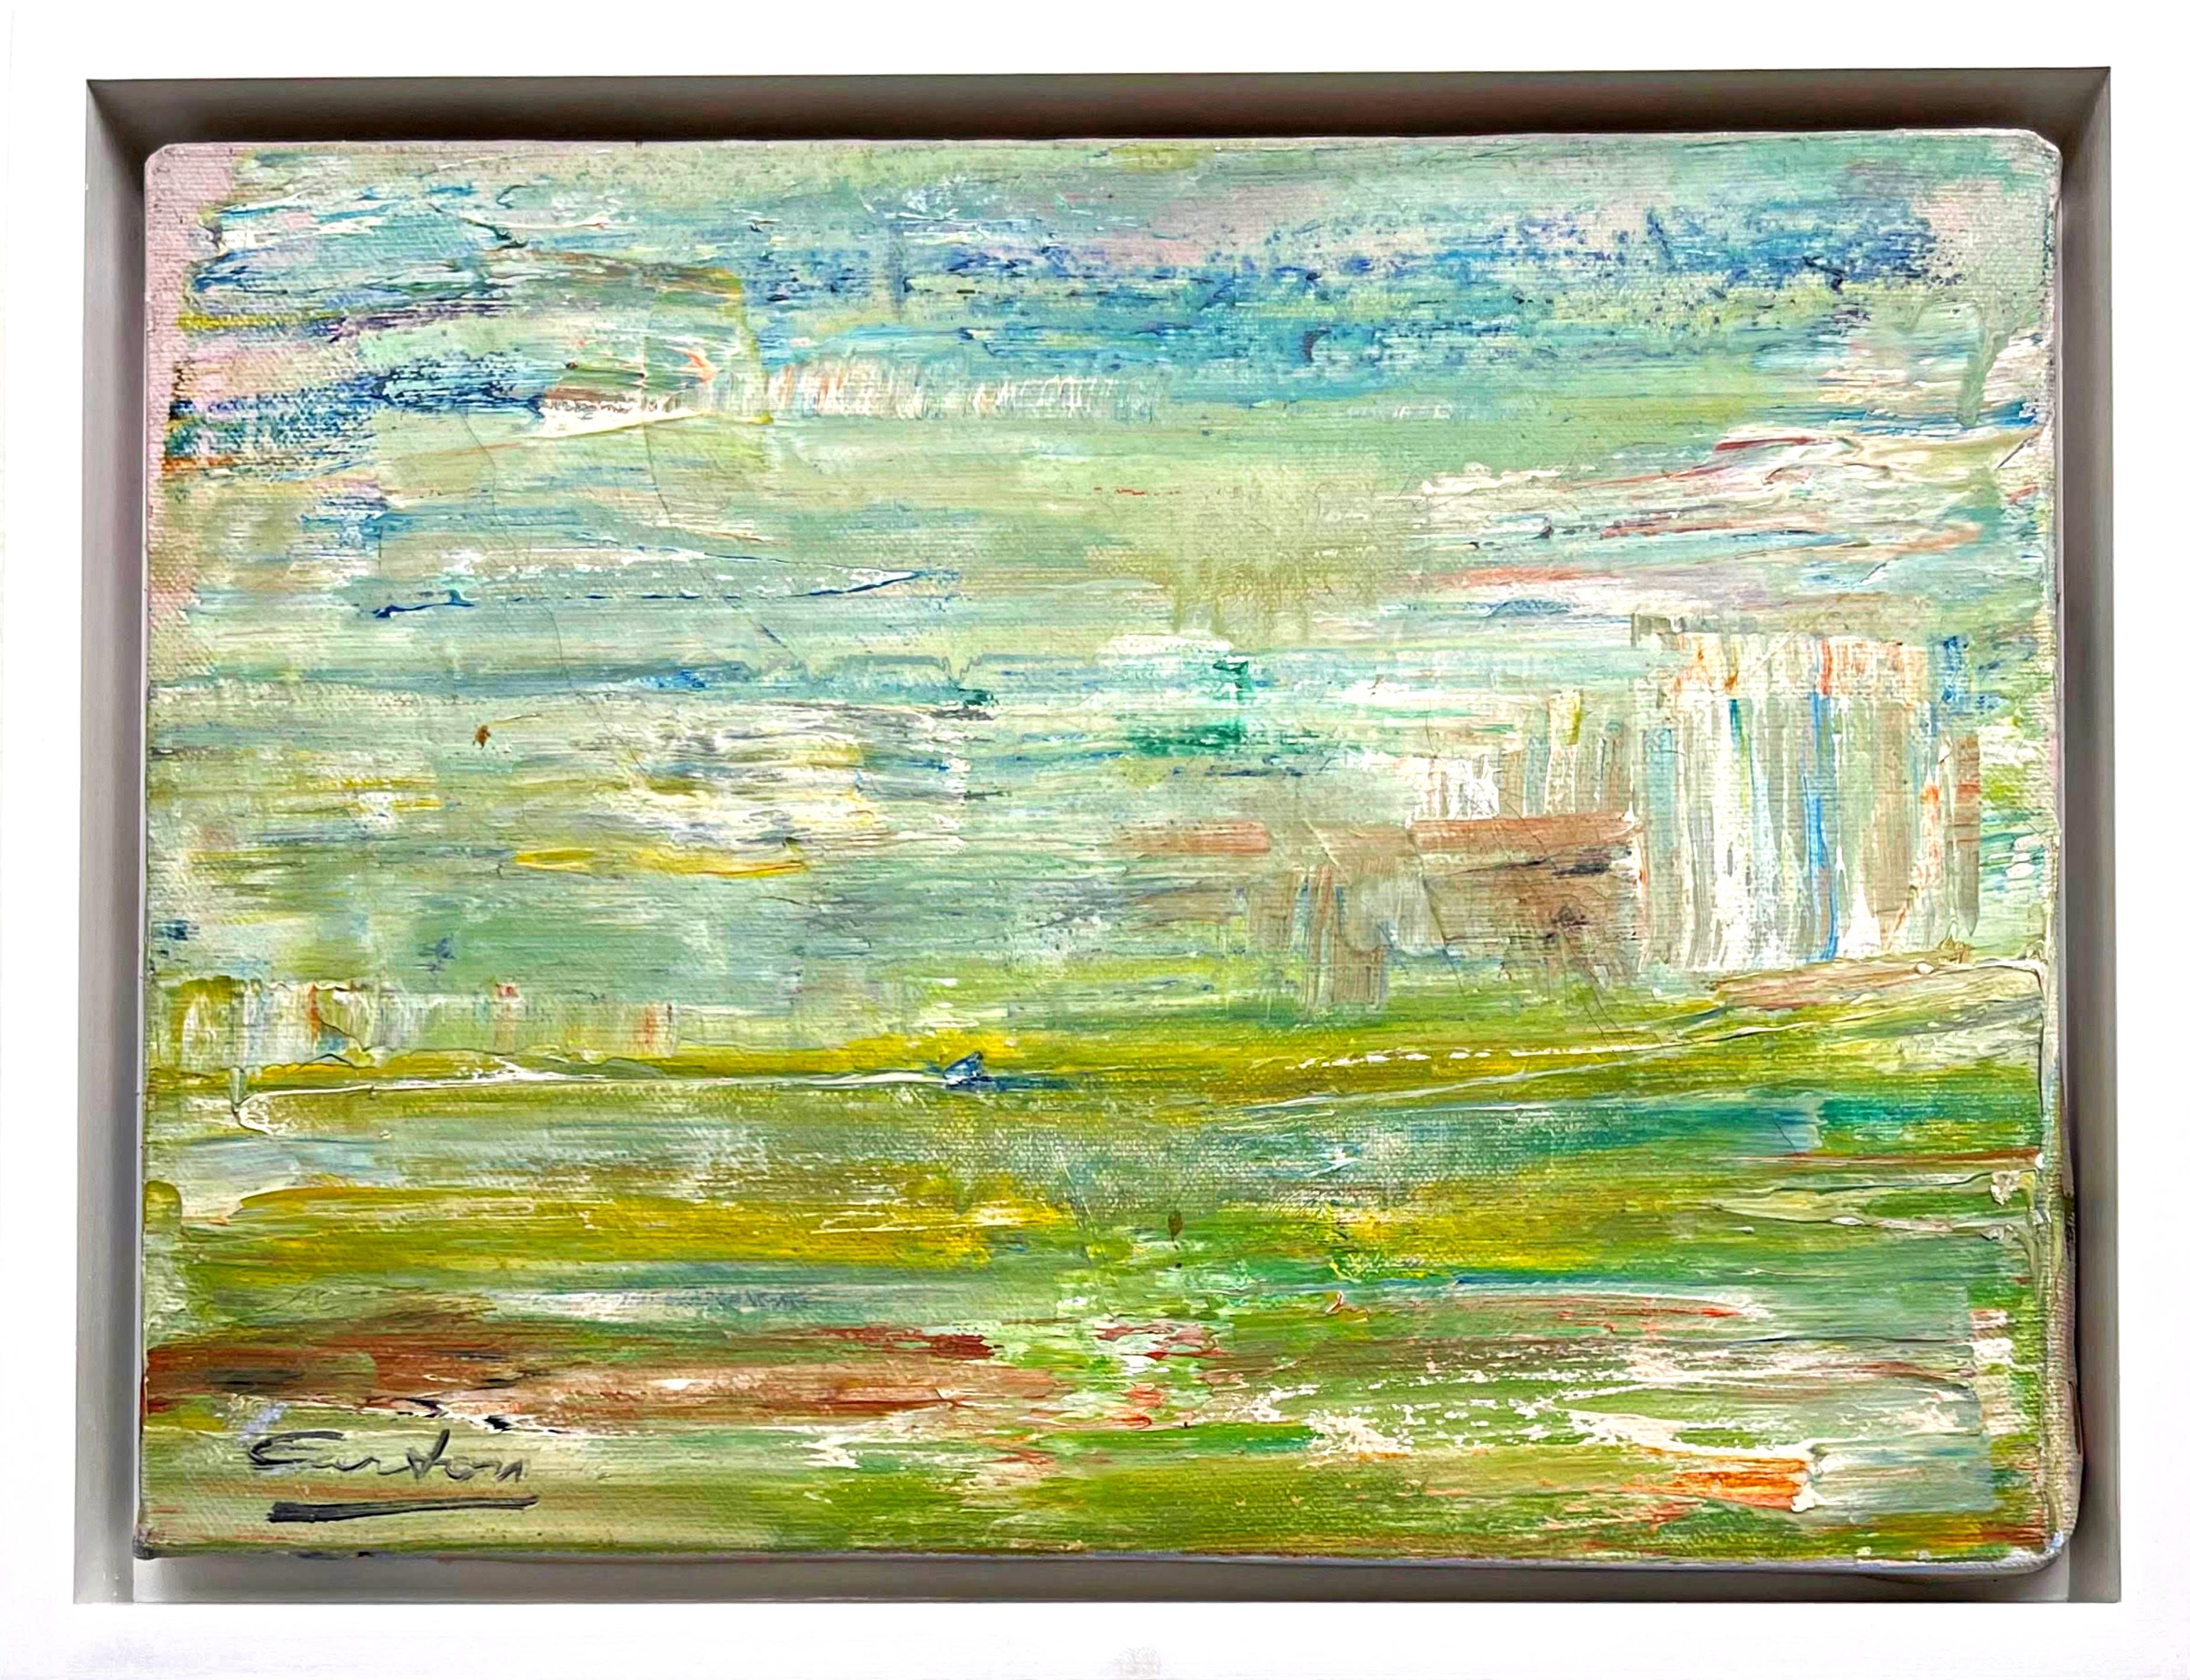 Untitled Abstract Expressionist Mid Century Modern Landscape painting, Signed 2X - Painting by Norman Carton